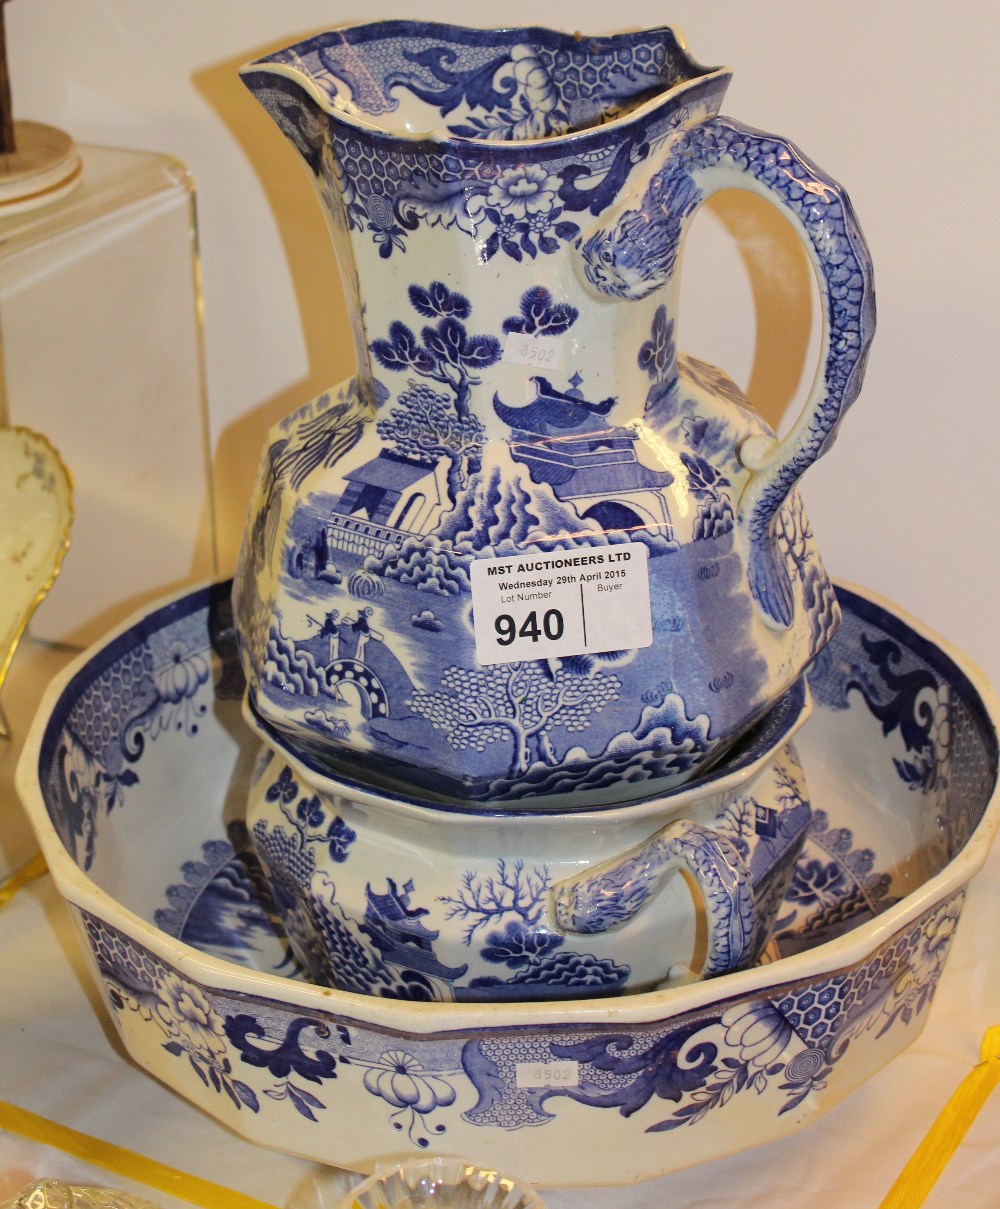 NV- a large blue and white willow pattern Masons jug and basin set with chamber pot